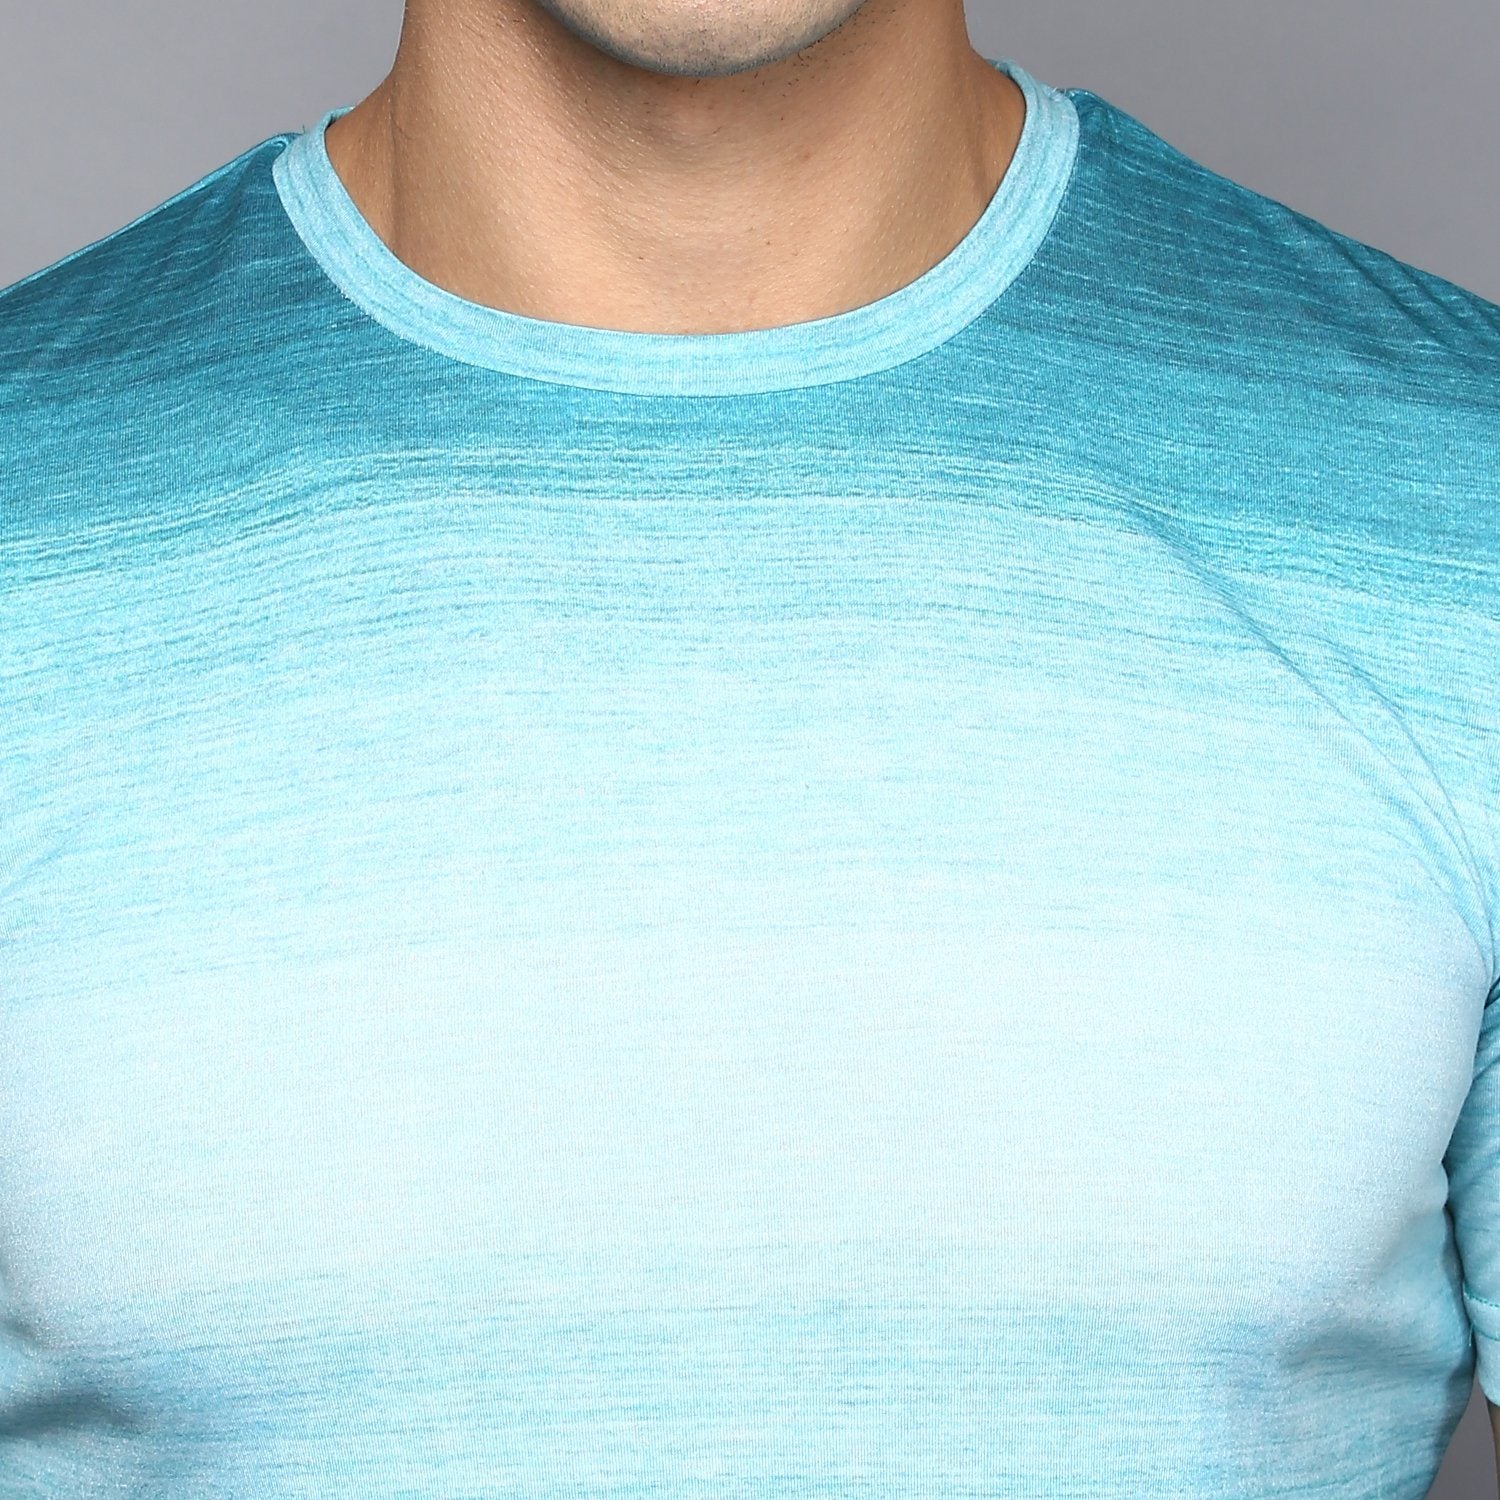 Turquoise Blue Ombre Crew Neck T-Shirt